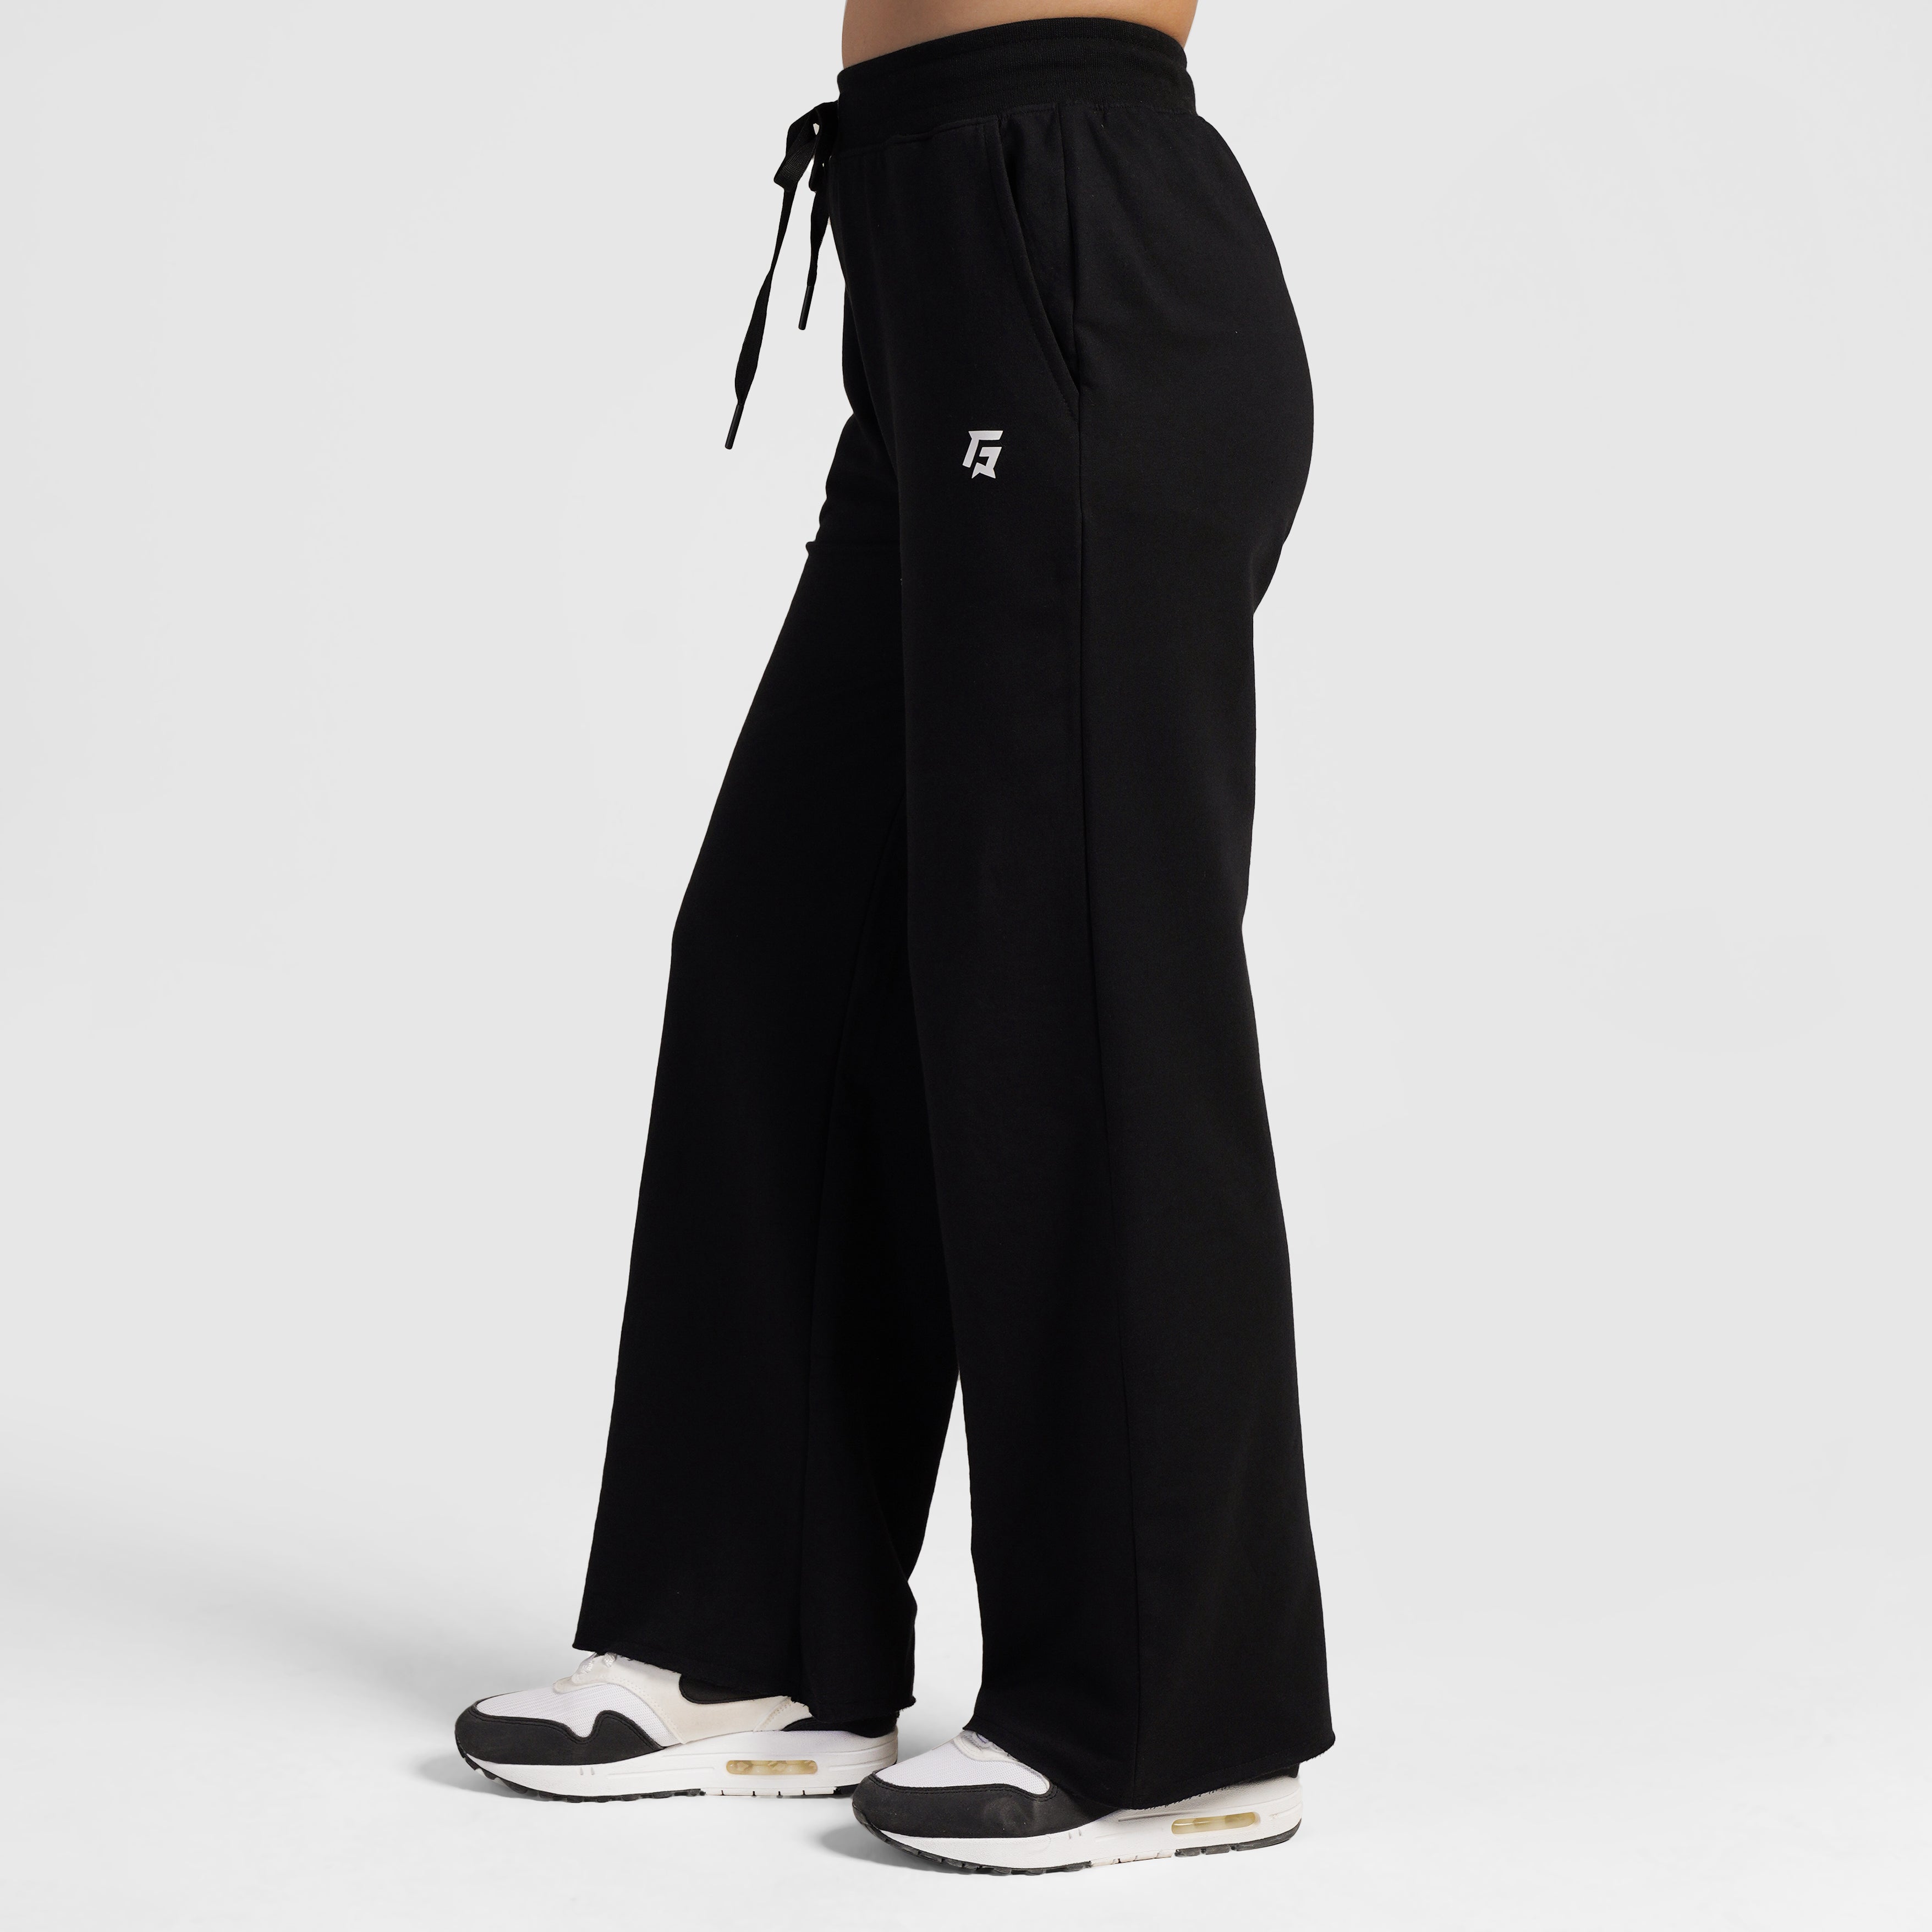 Comfort Max Gym Trousers (Black)